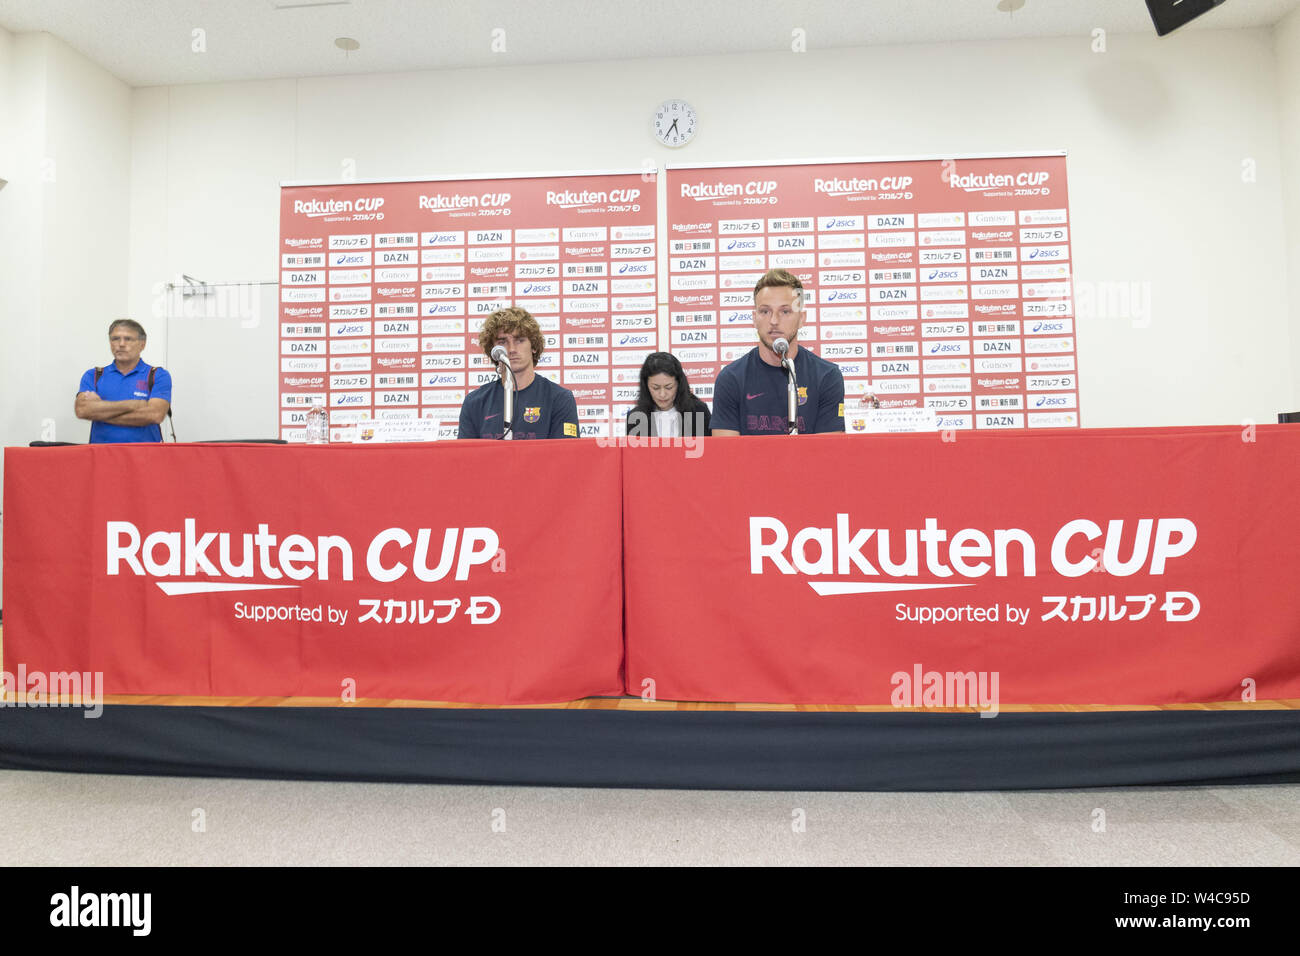 Tokyo, Japan. 22nd July, 2019. (L to R) FC Barcelona players Antoine Griezmann and Ivan Rakitic speak during a news conference at Machida Stadium. The FC Barcelona players trained at Machida Stadium a day before its first match against Chelsea FC as part of the Rakuten Cup. Credit: Rodrigo Reyes Marin/ZUMA Wire/Alamy Live News Stock Photo